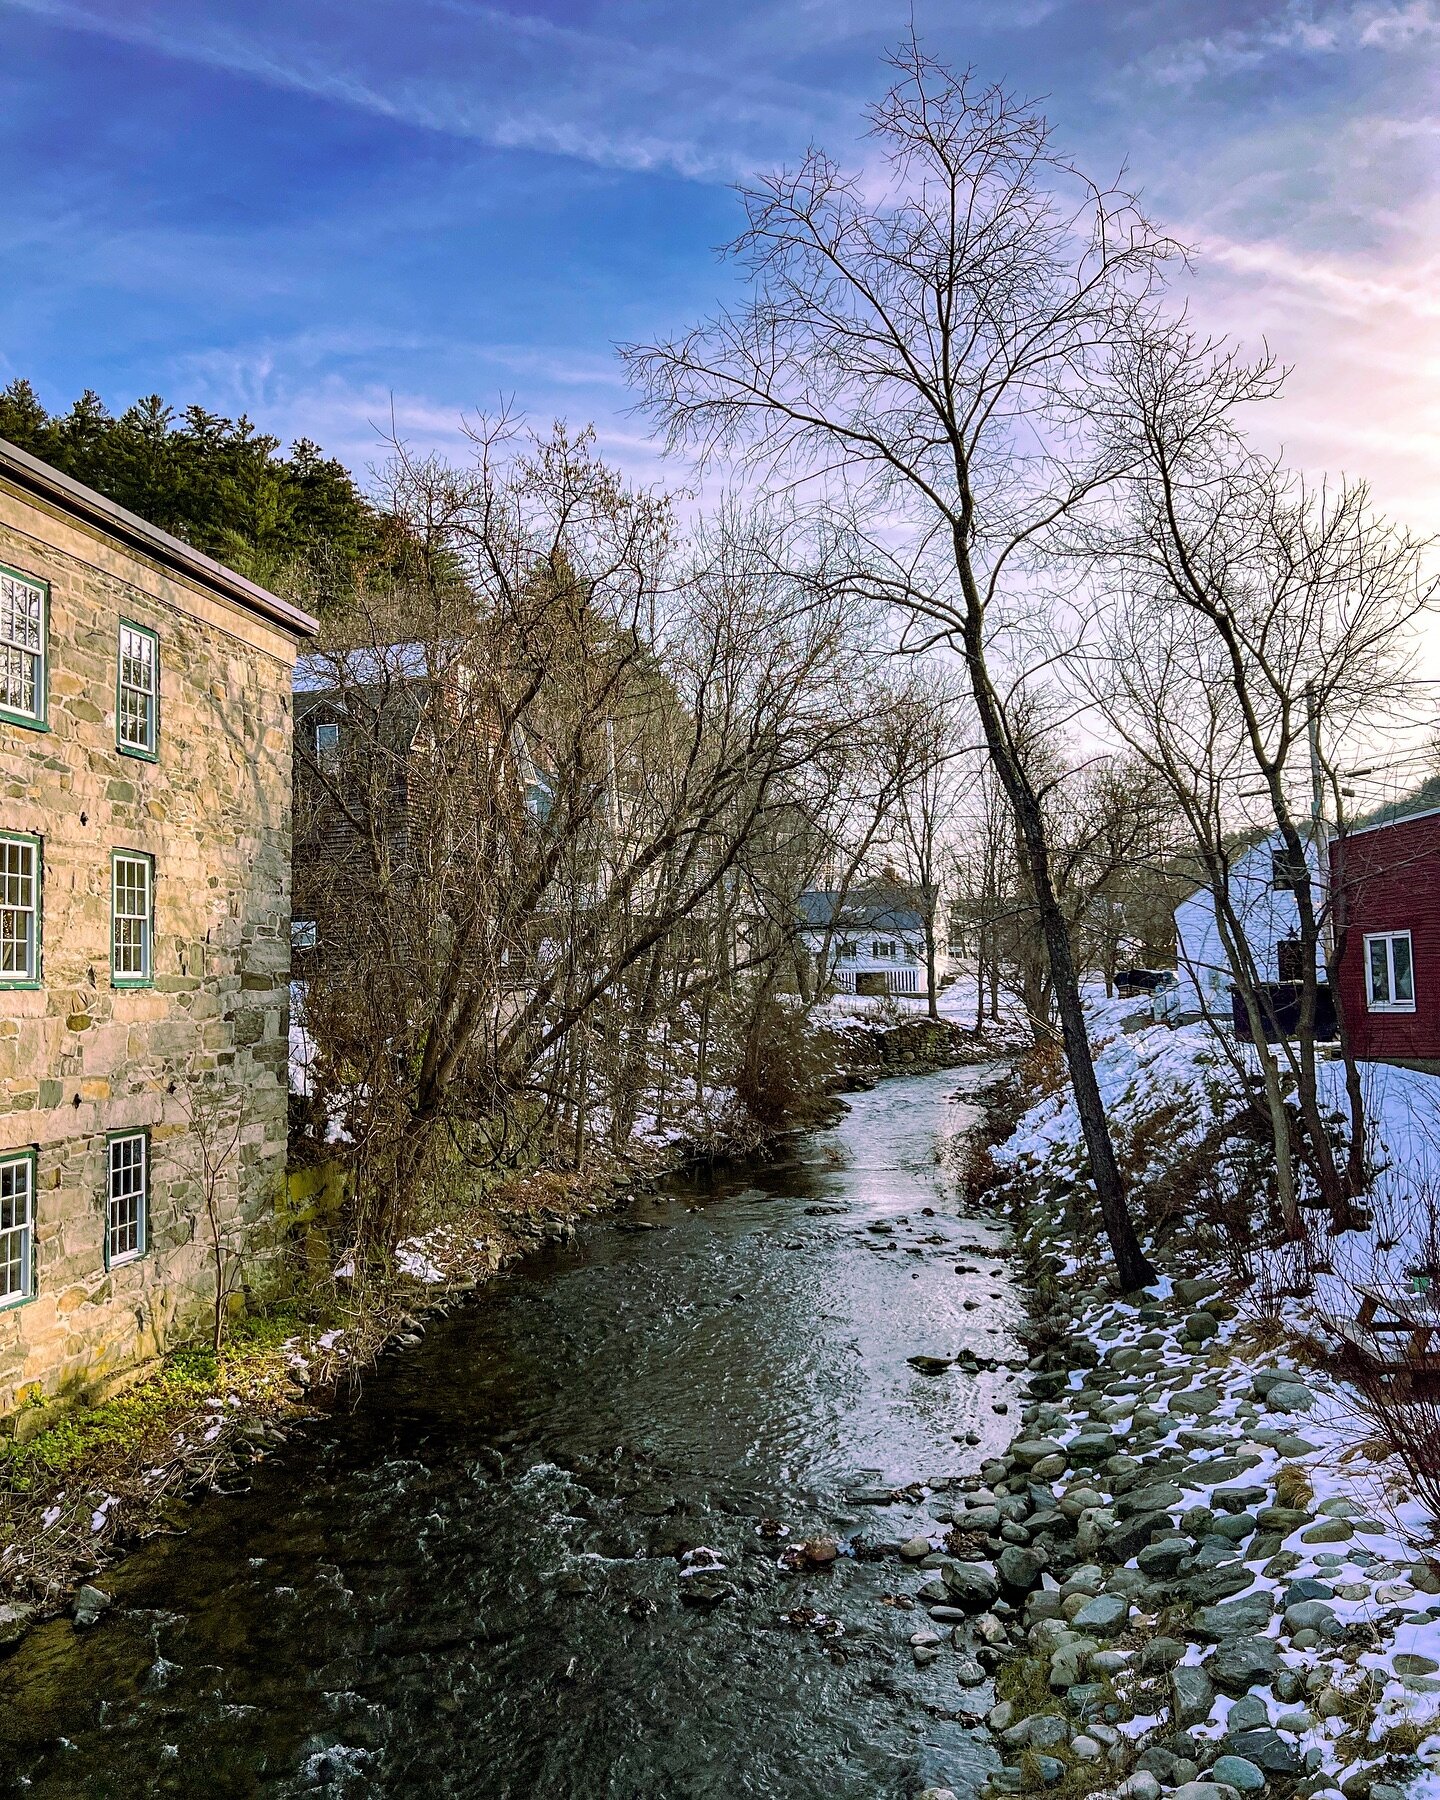 Caught a serene moment by Kendron Brook in Woodstock, Vermont 🌿✨ 

Post-fall foliage, pre-ski season &ndash; these Vermont towns are all about that cozy calm. Had a blast shopping my heart out! This snap's one of two from my speedy 2-hour visit &nda